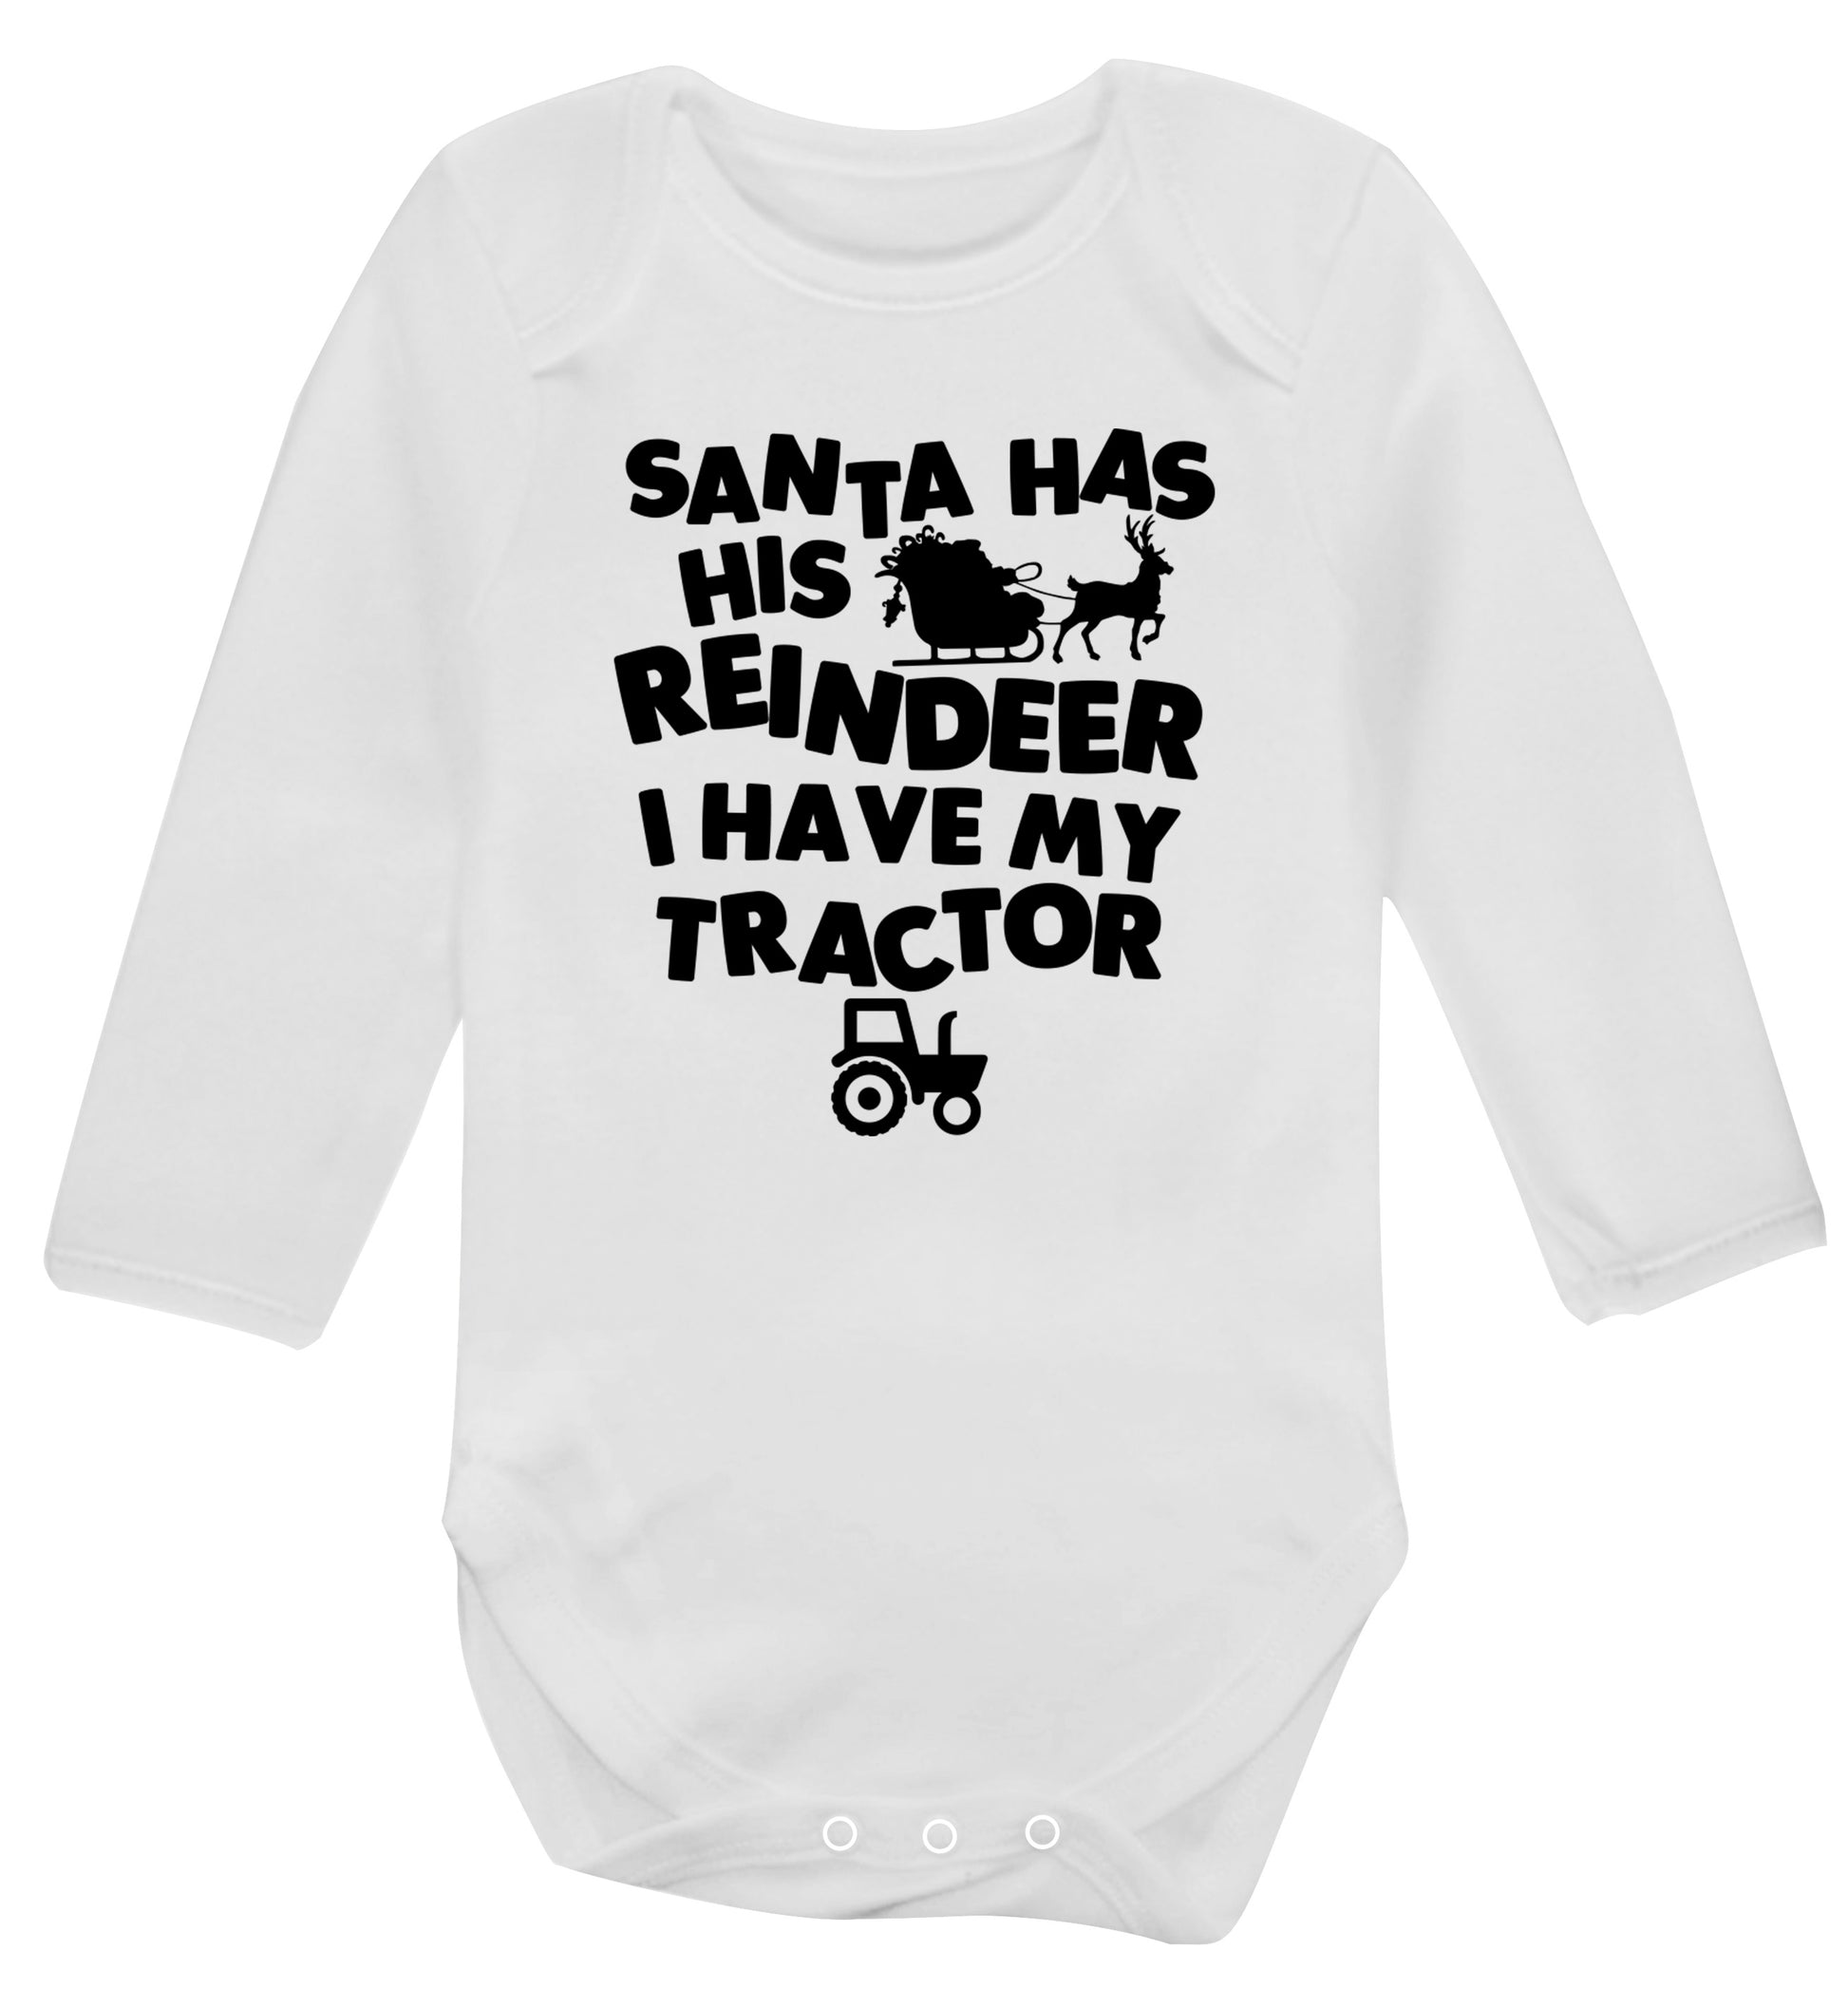 Santa has his reindeer I have my tractor Baby Vest long sleeved white 6-12 months